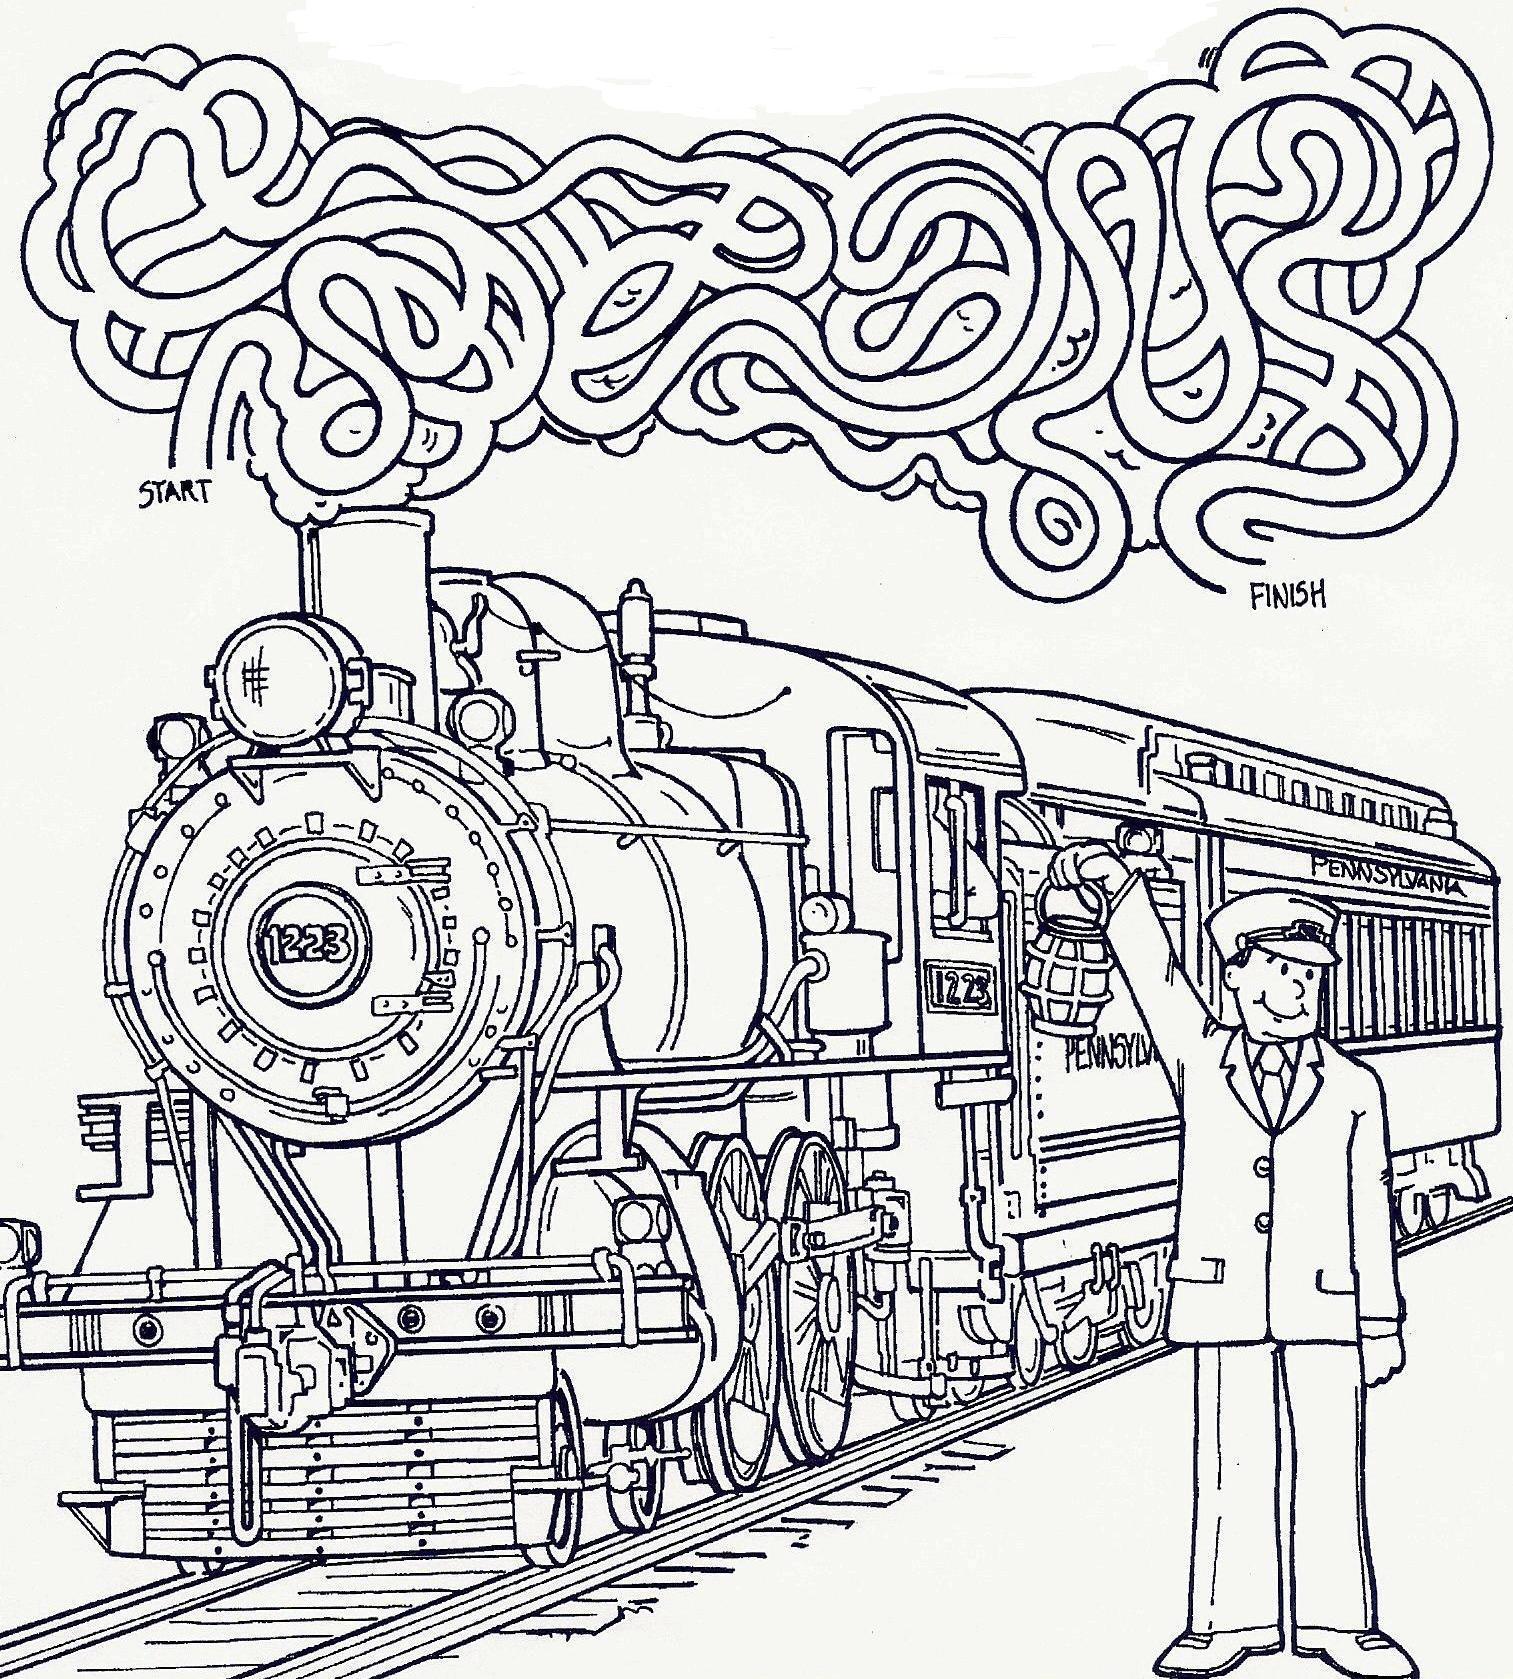 Graphic of steam engine with a puff of smoke which contains a maze for children.